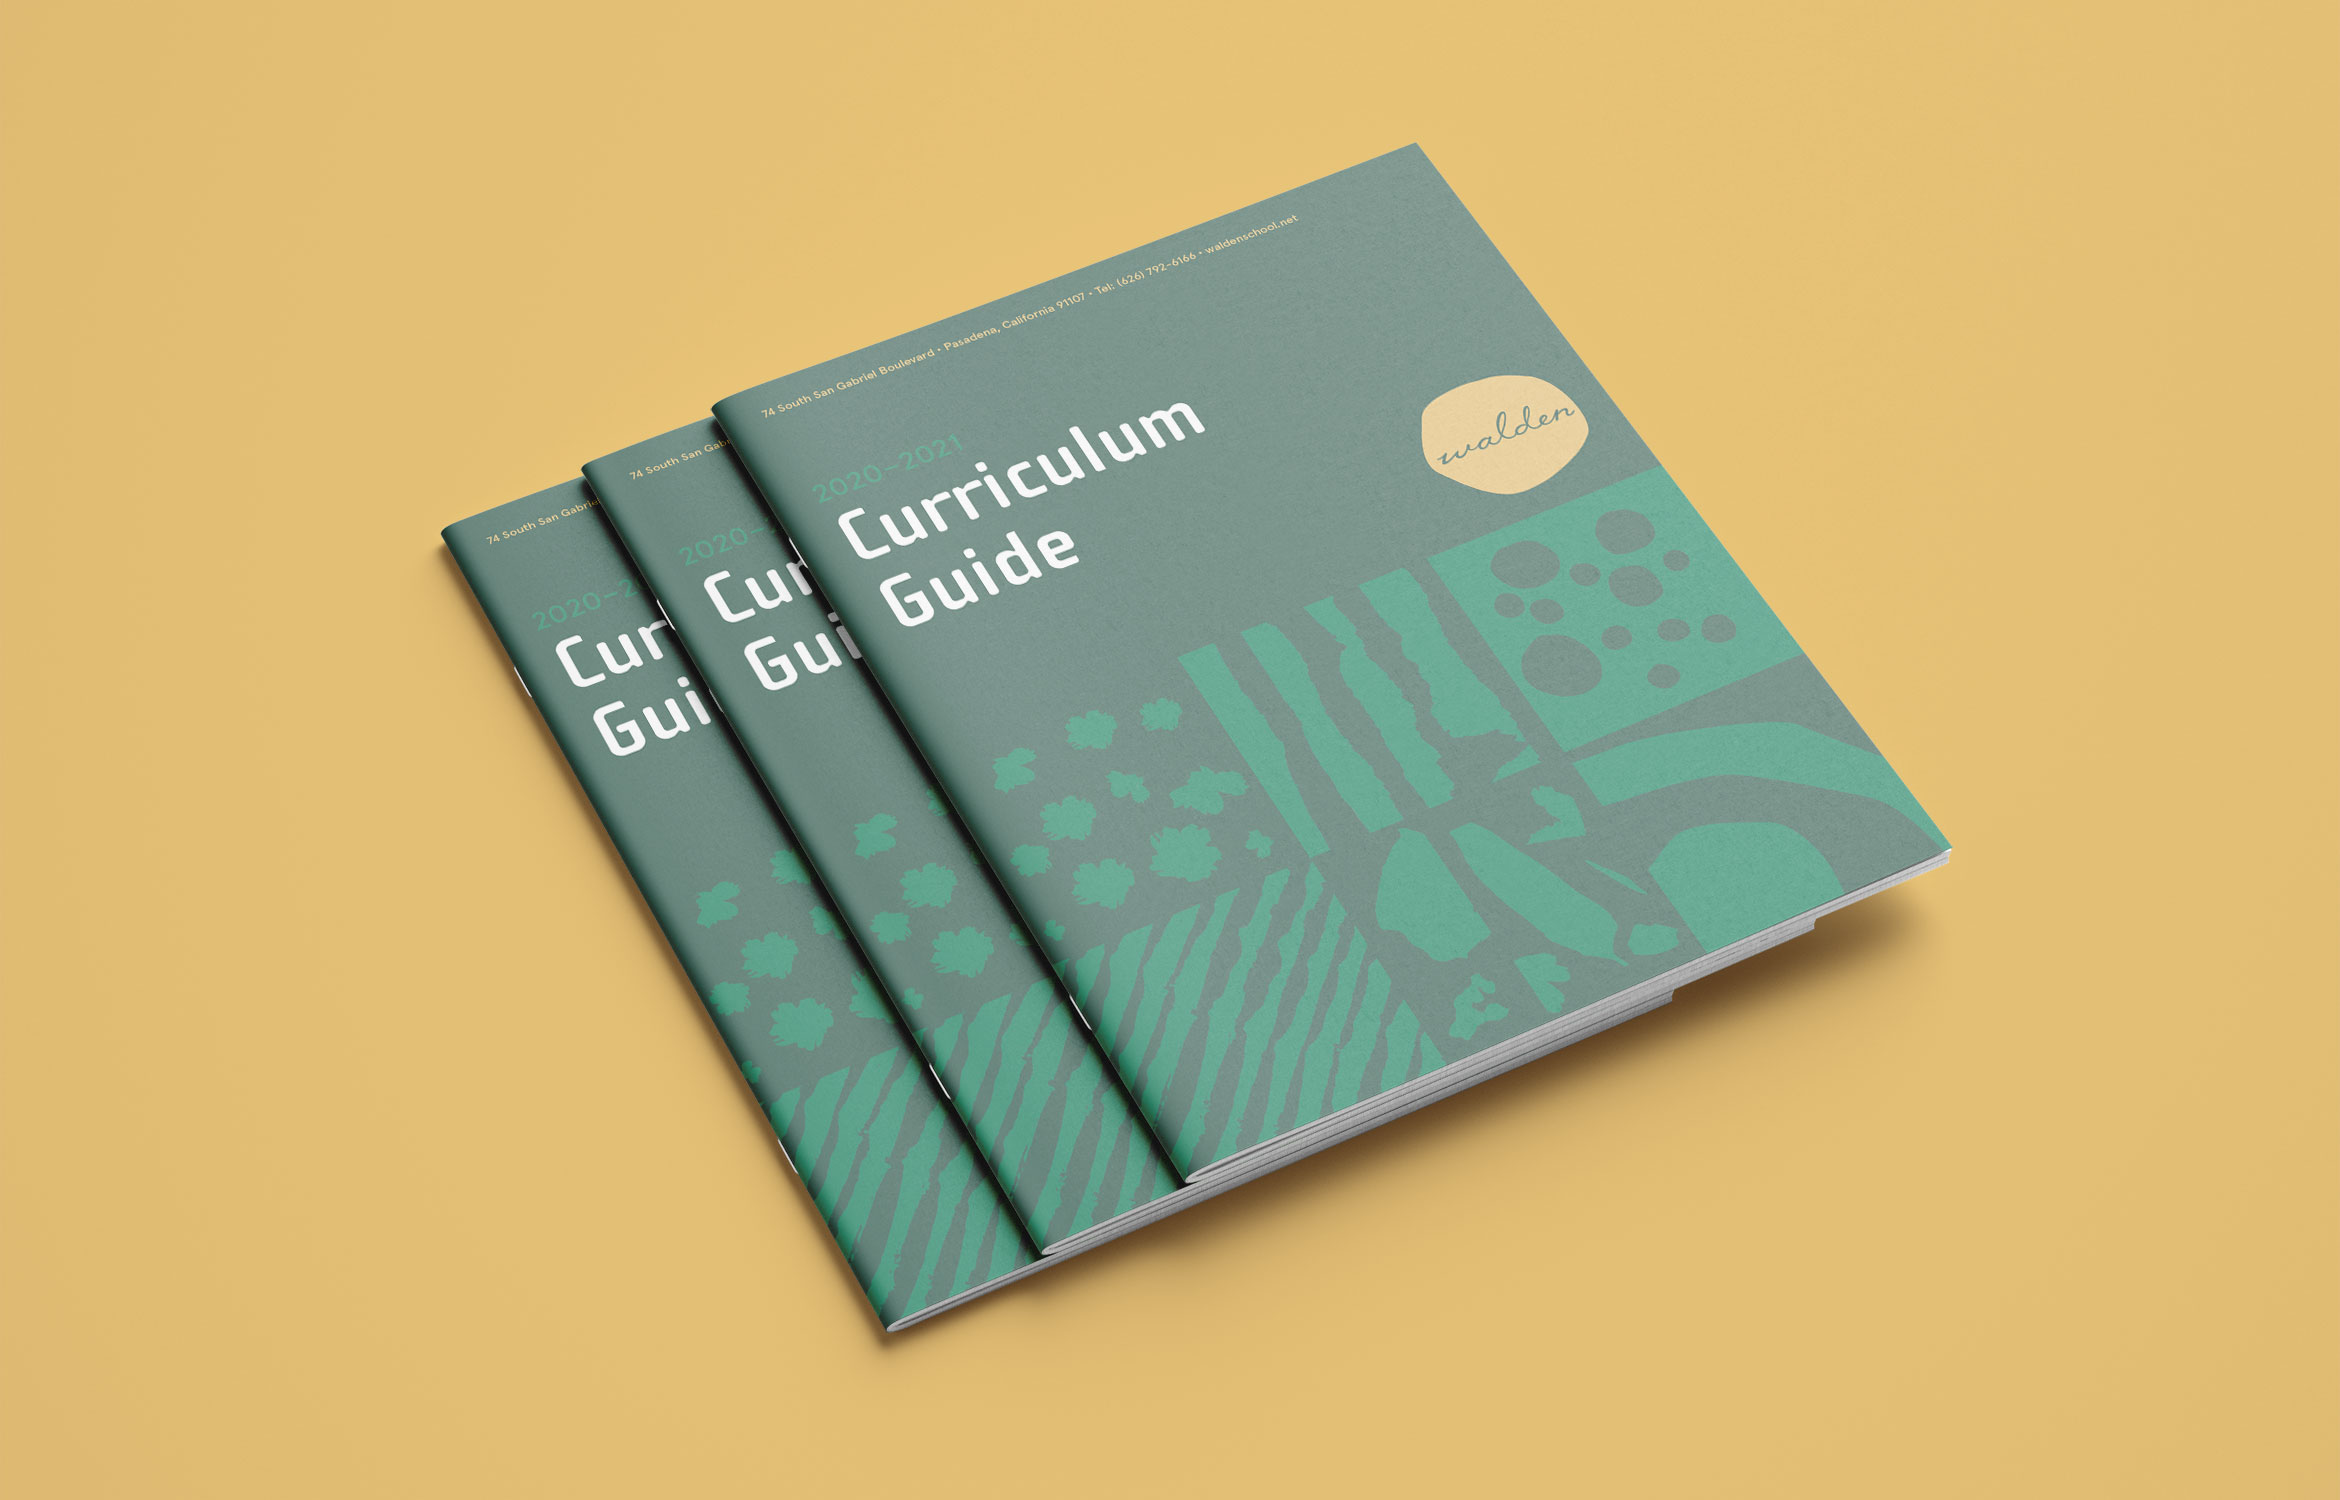 Curriculum Guide Cover from the Walden School rebrand designed by Kilter